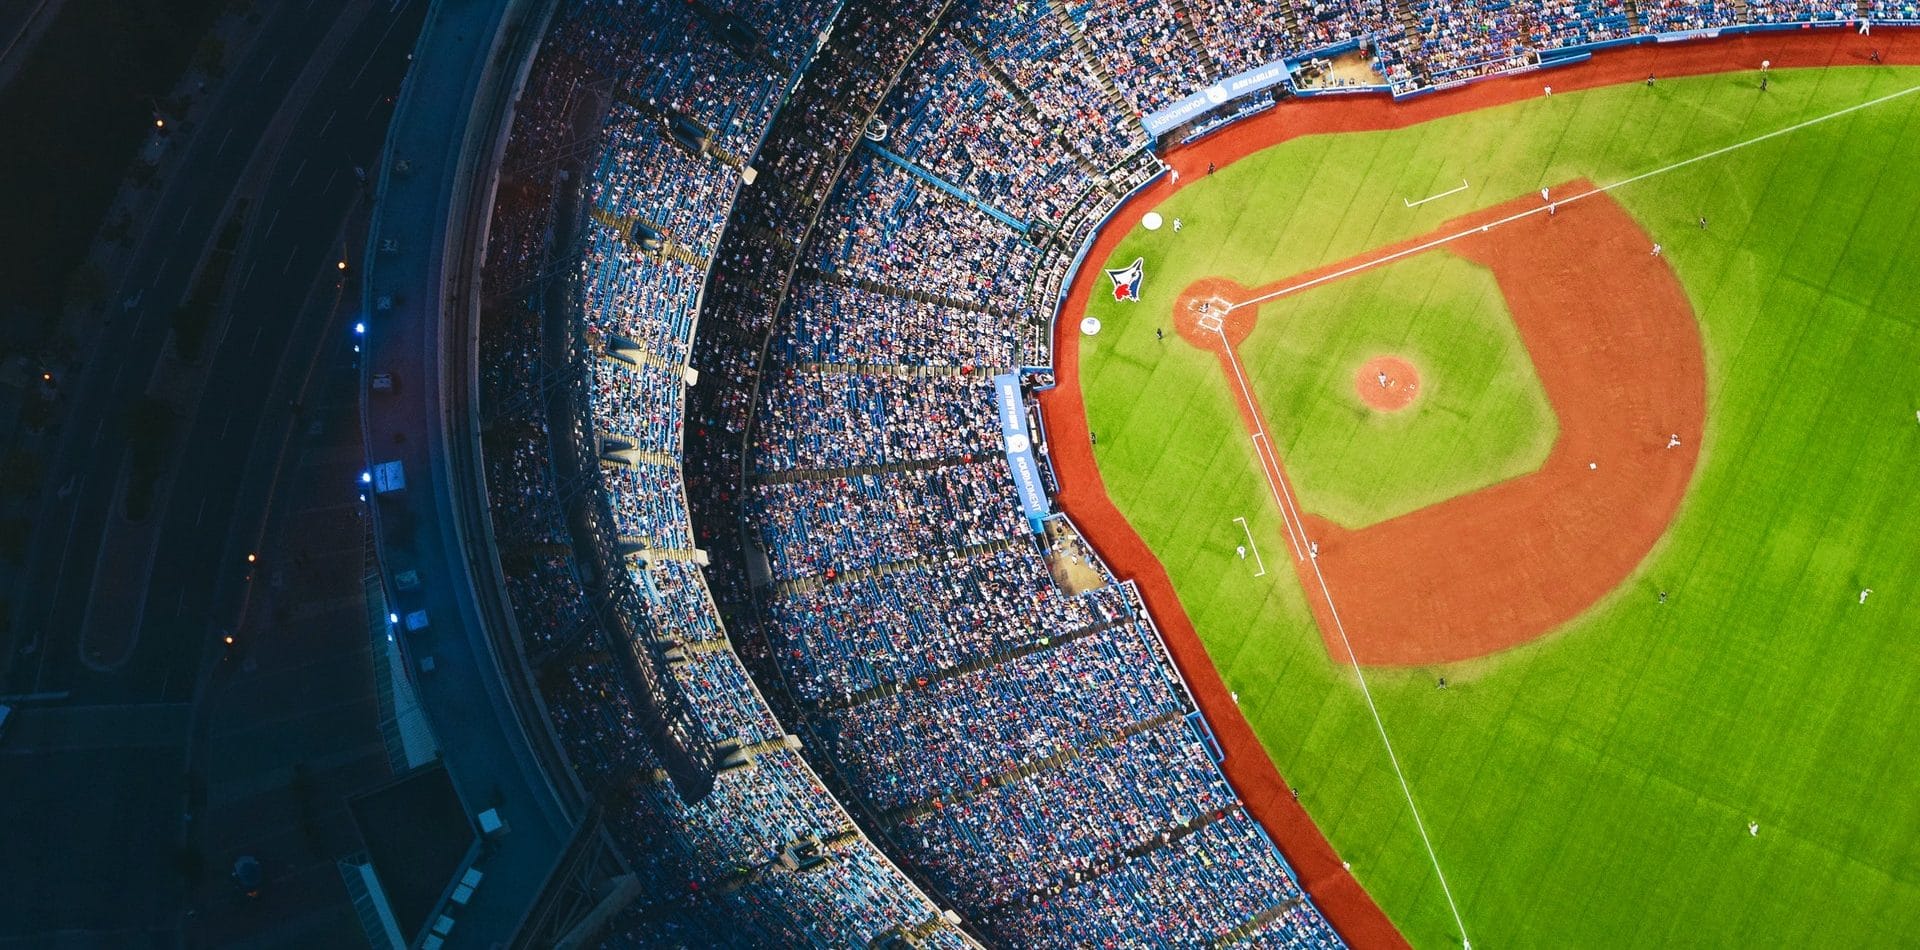 How could Major League Baseball affect the future of retail amidst the coronavirus?